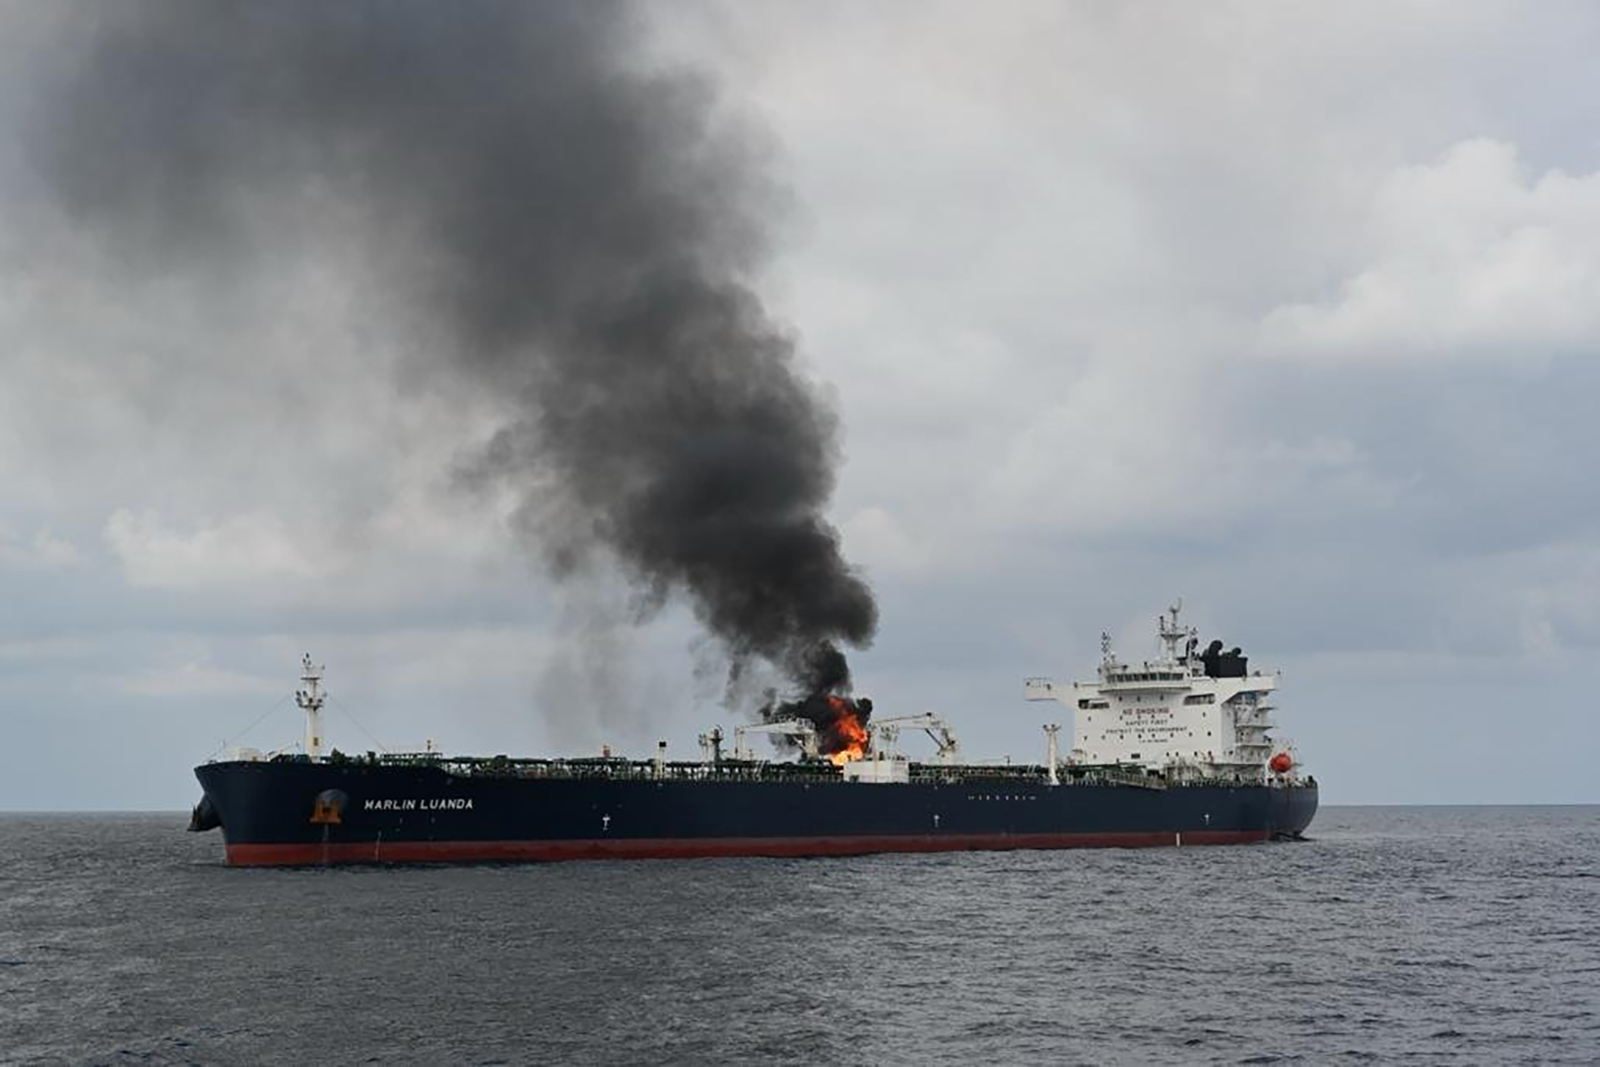 Stills show the Marlin Luanda vessel on fire in the Gulf of Aden after it was reportedly struck by an anti-ship missile fired from a Houthi-controlled area of Yemen.